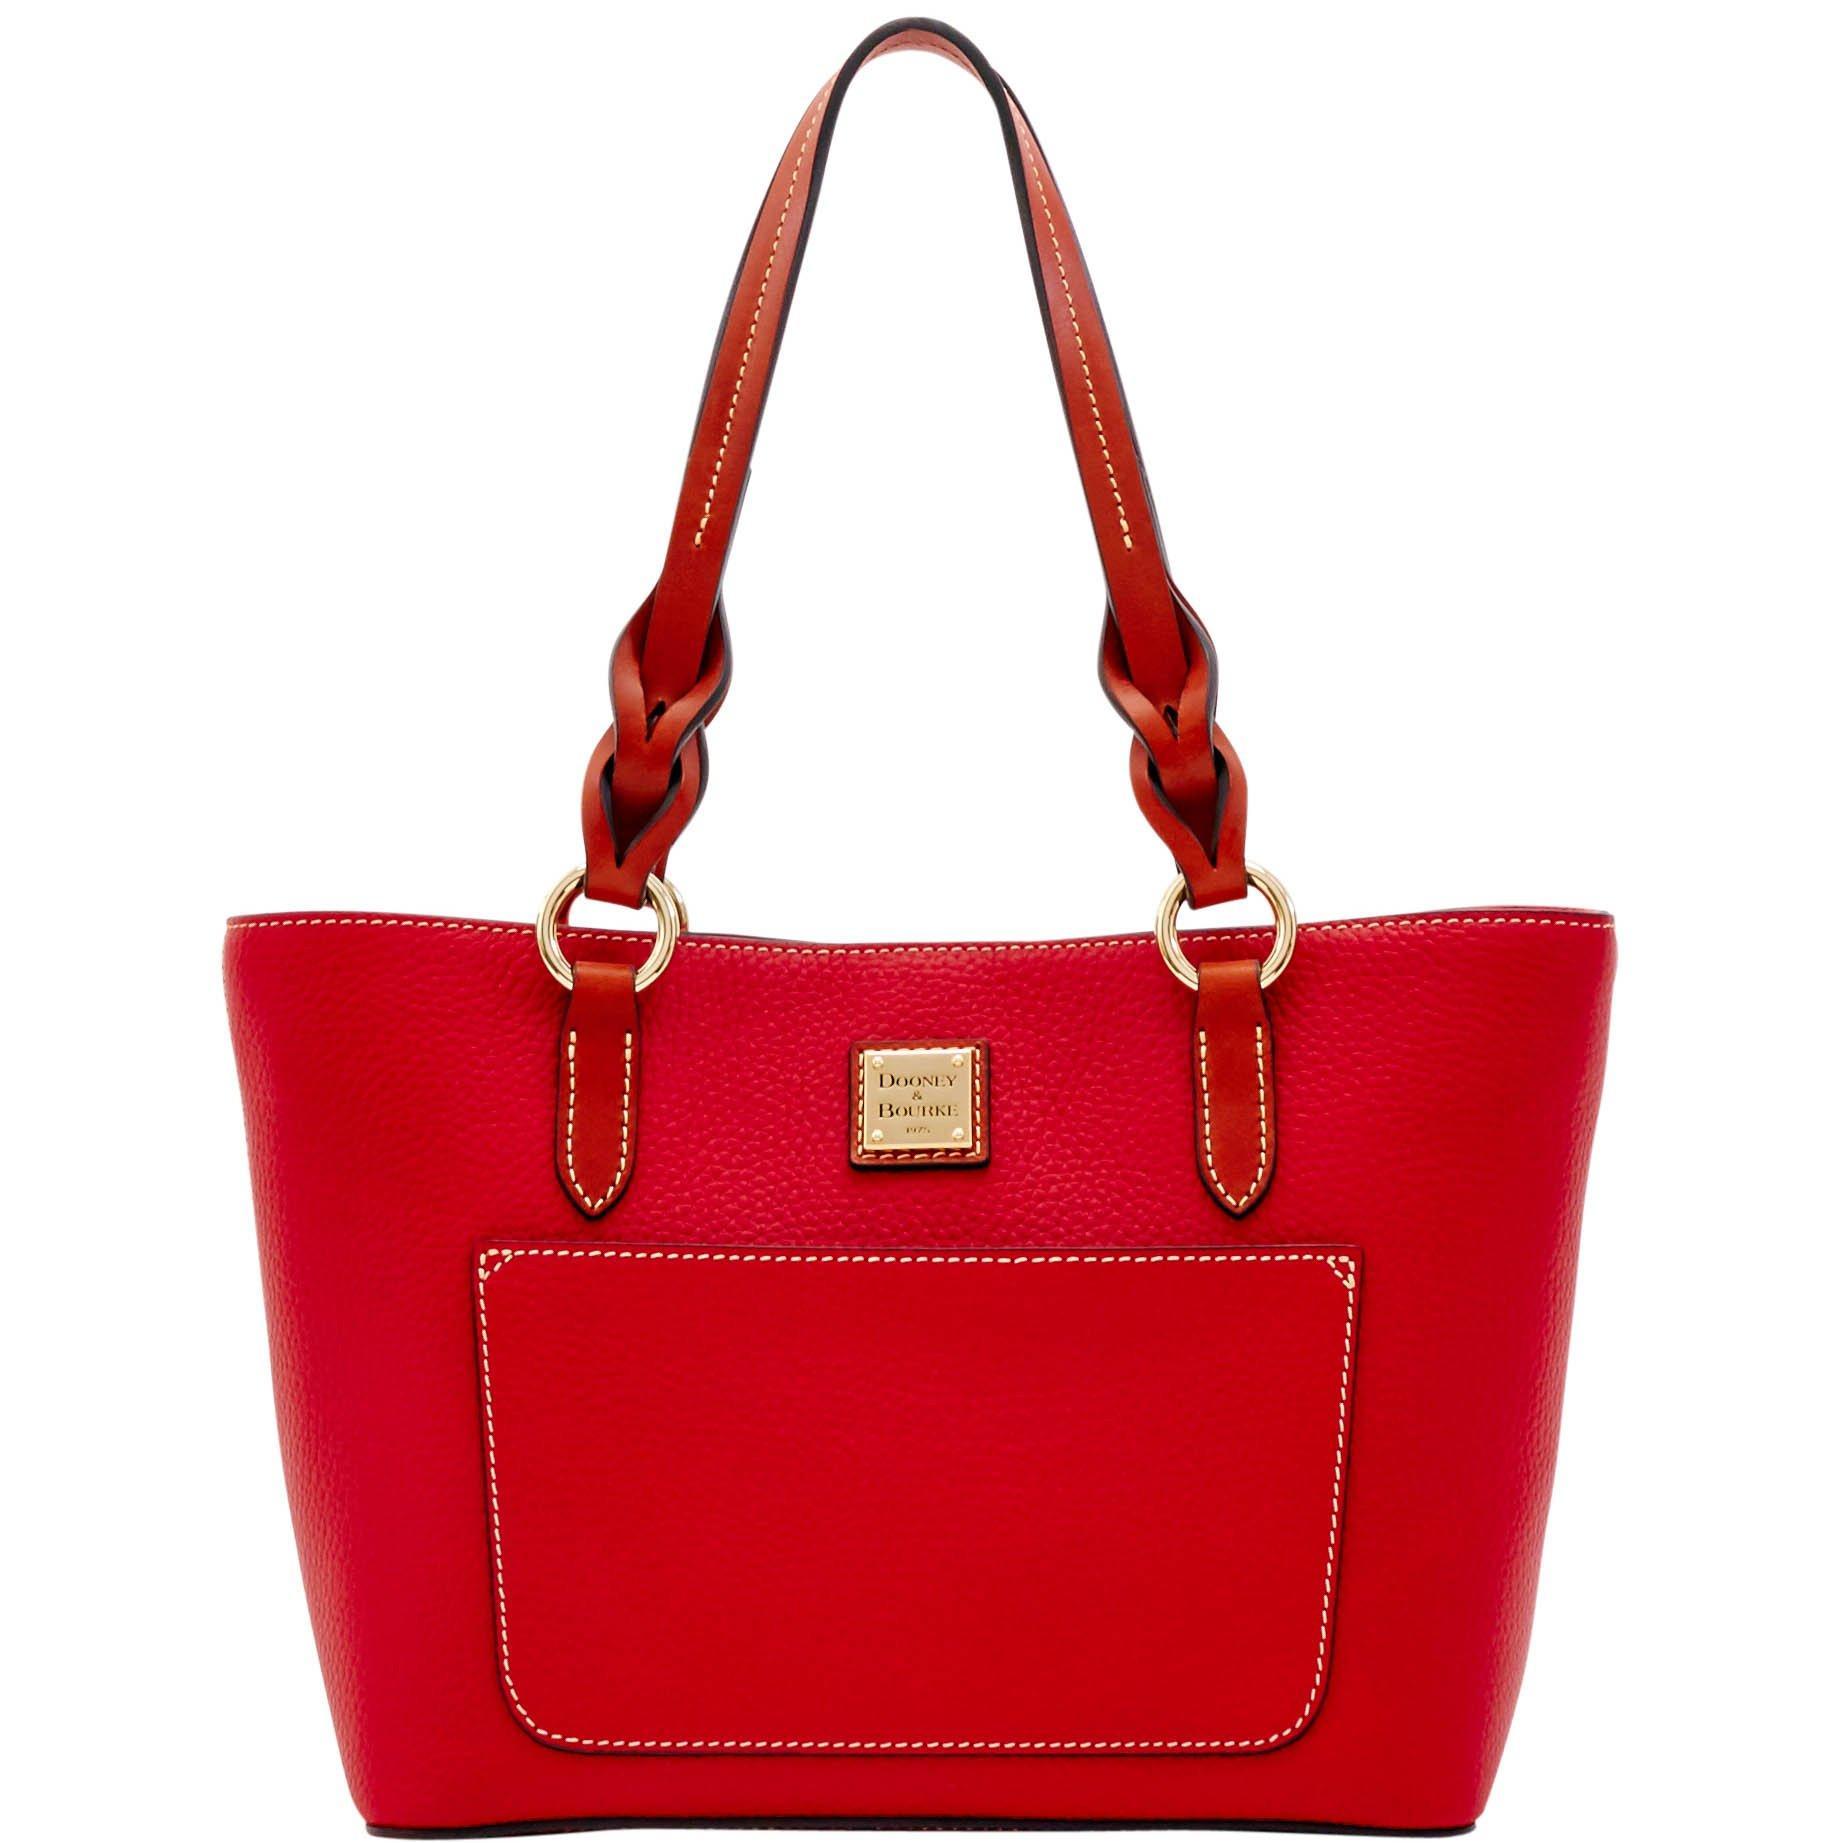 Dooney & Bourke Leather Pebble Grain Tammy Tote in Red - Lyst